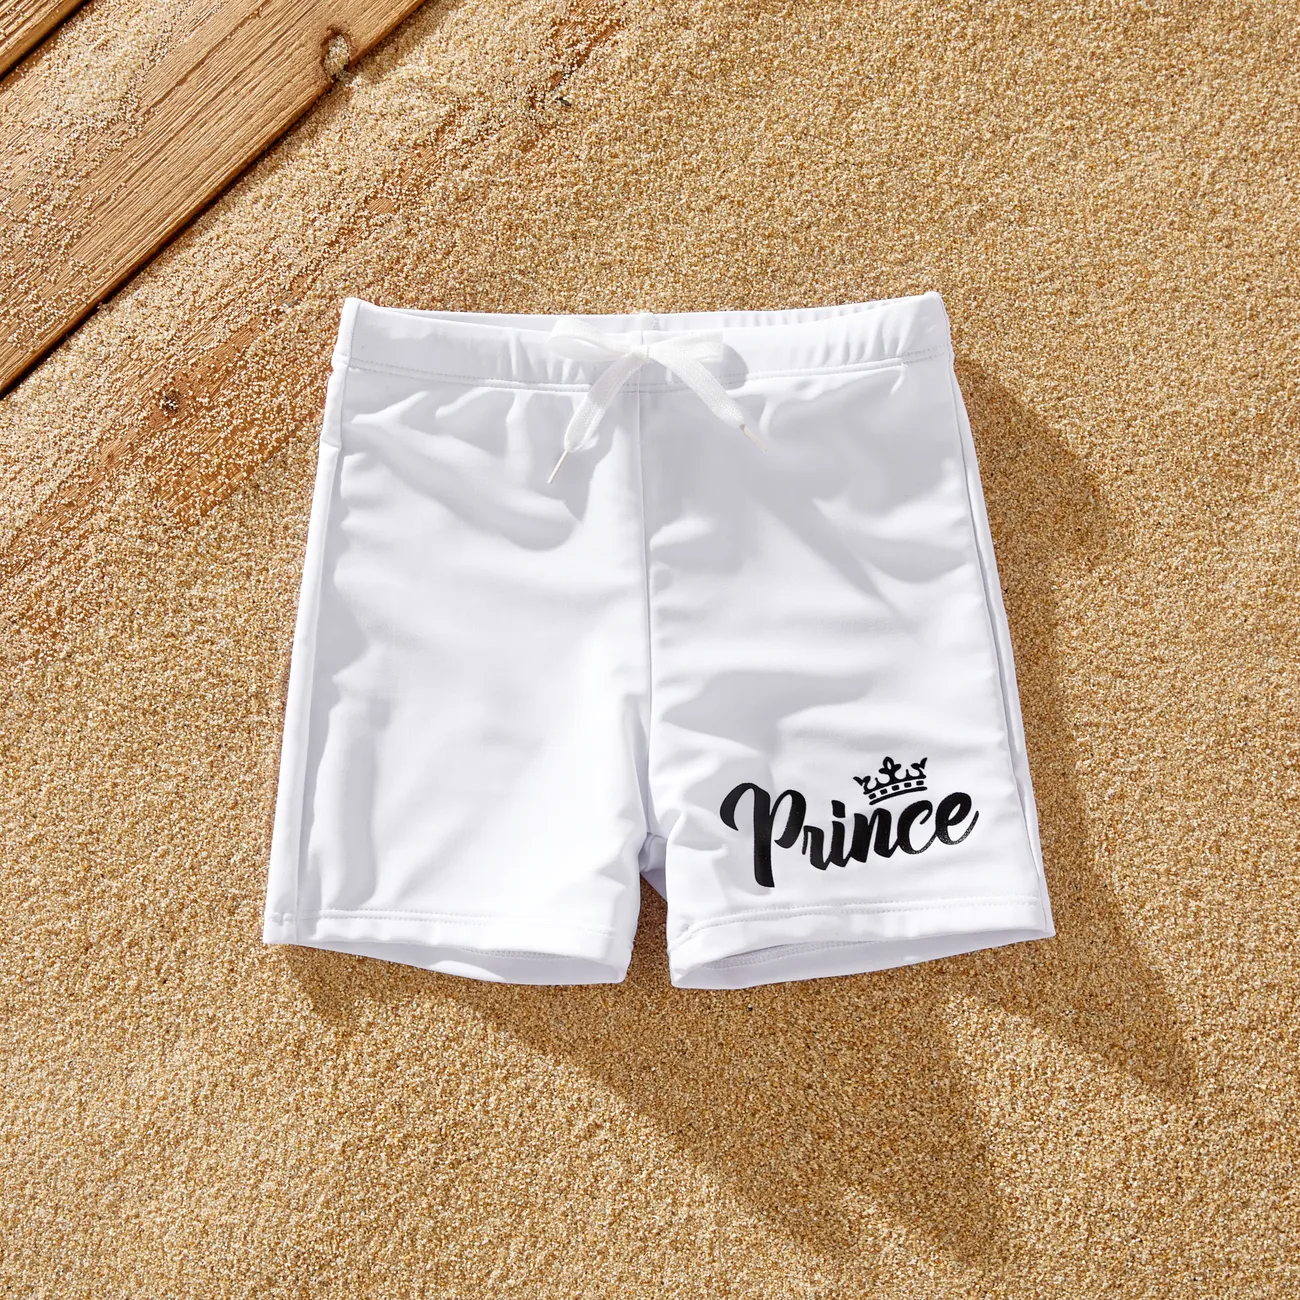 Family Matching Letter Printed Drawstring Swim Trunks or Bow Pattern Strap Swimsuit White big image 1